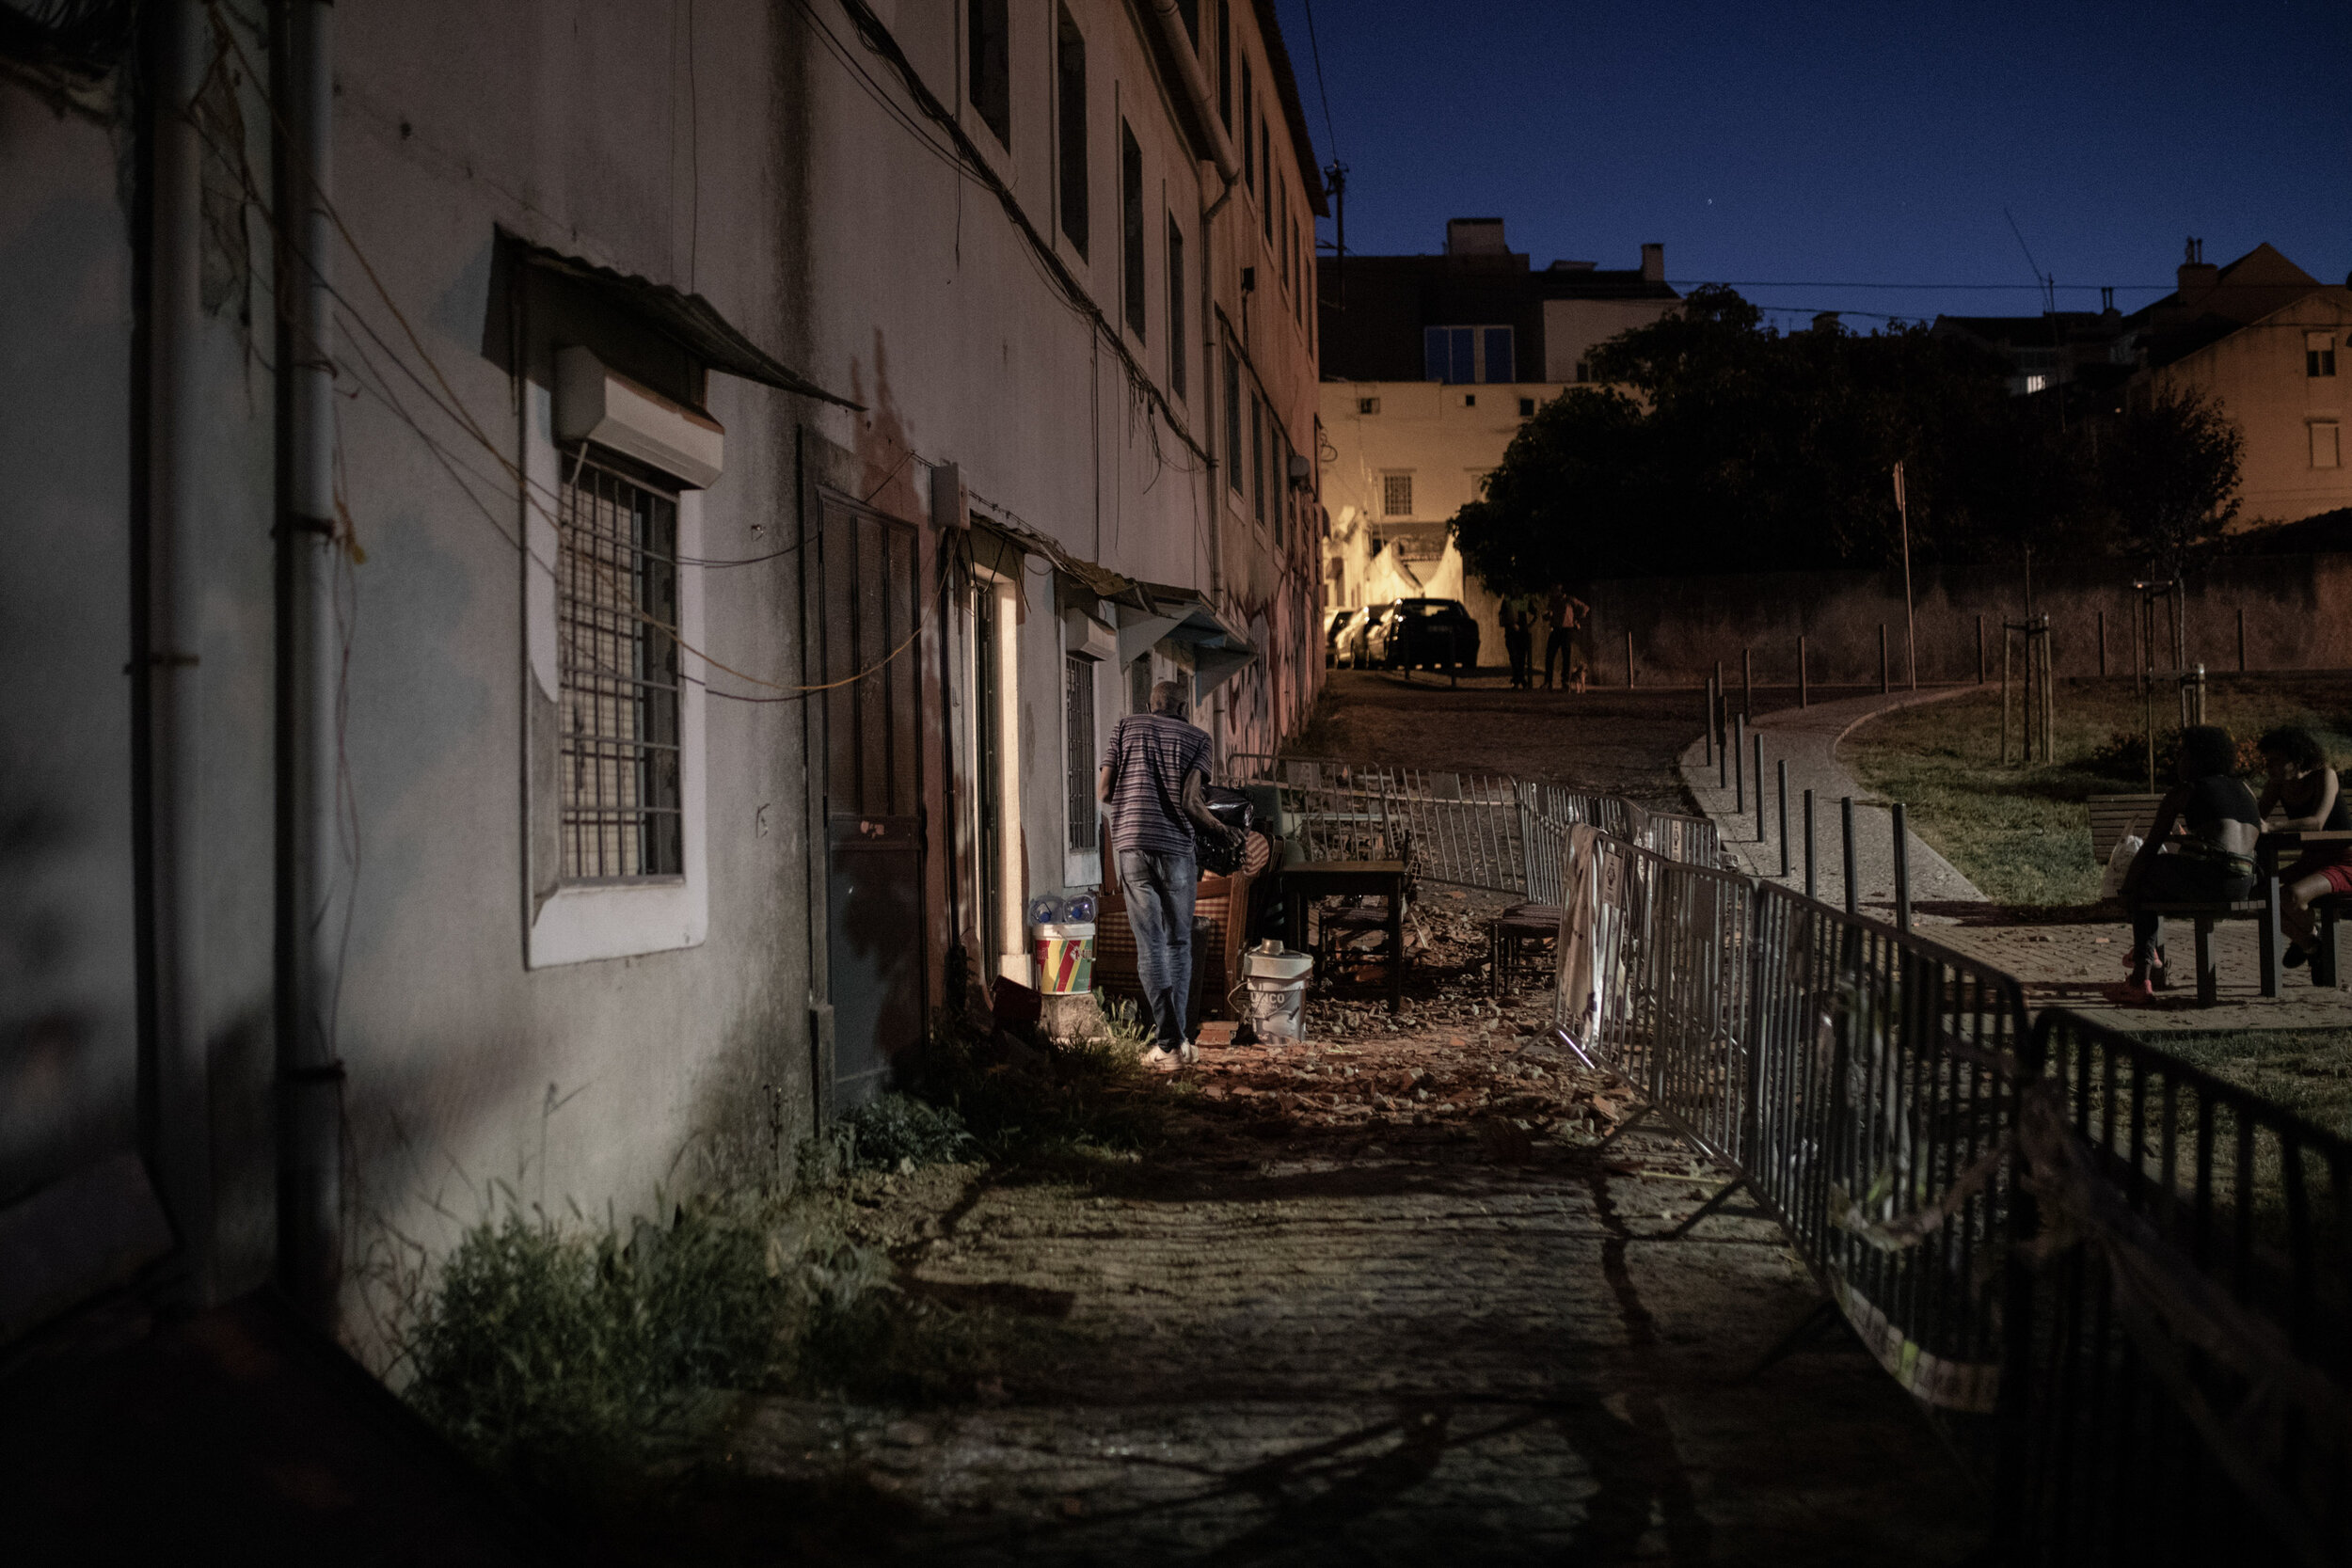  A man takes things out of his home in Quinta de Santo António. He was a part of a group of 30 people that were occupying these abandoned homes and were evicted by Lisbon’s City Hall.  